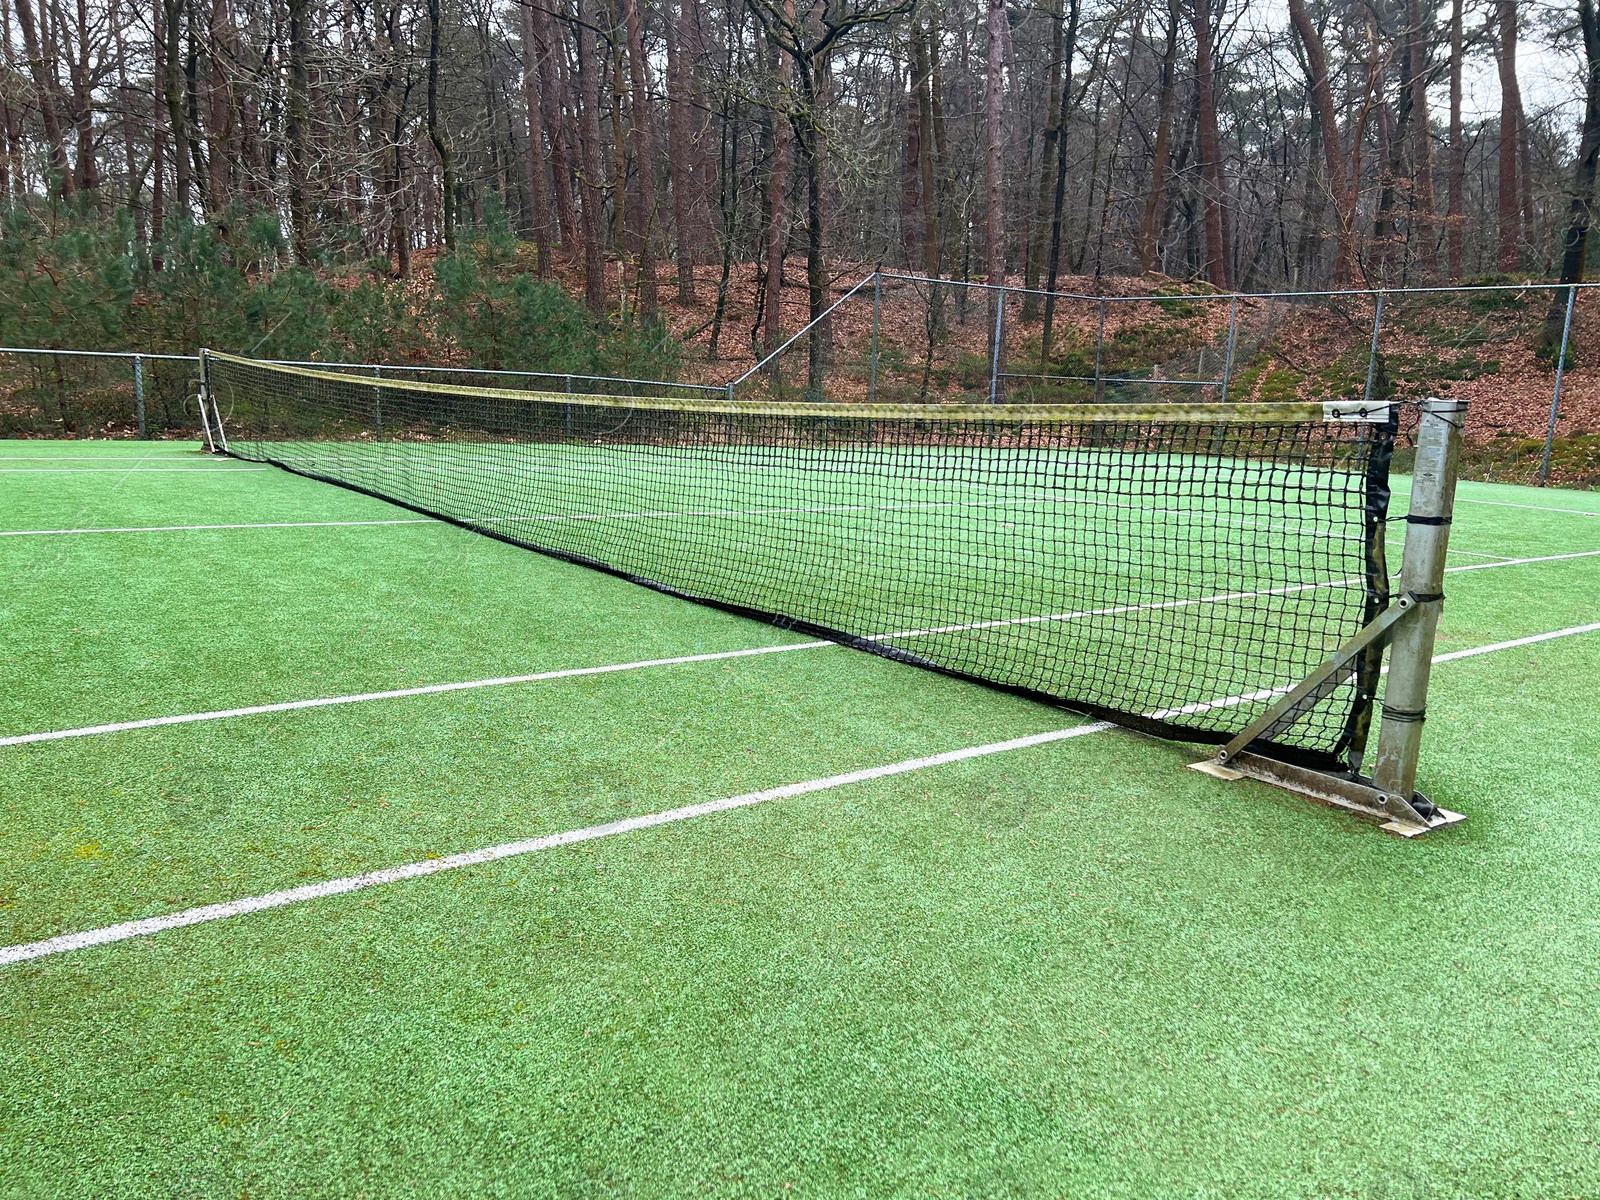 Photo of Tennis court with artificial grass and net outdoors